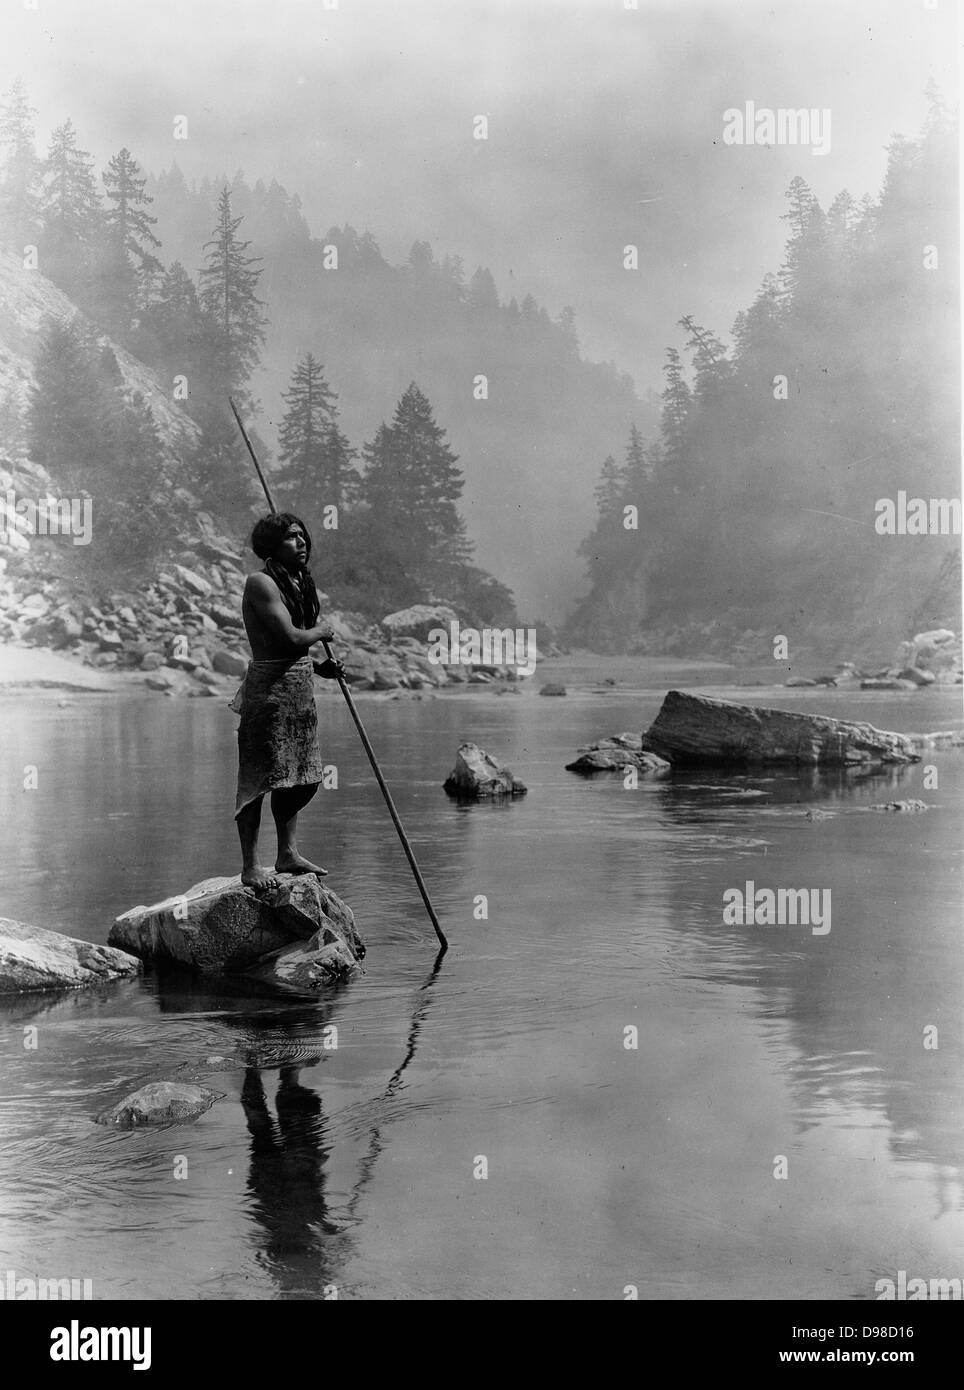 Hupa man with spear, standing on rock midstream, in background, fog partially obscures trees on mountainsides, 1923. Photograph by Edward Curtis (1868-1952). Stock Photo